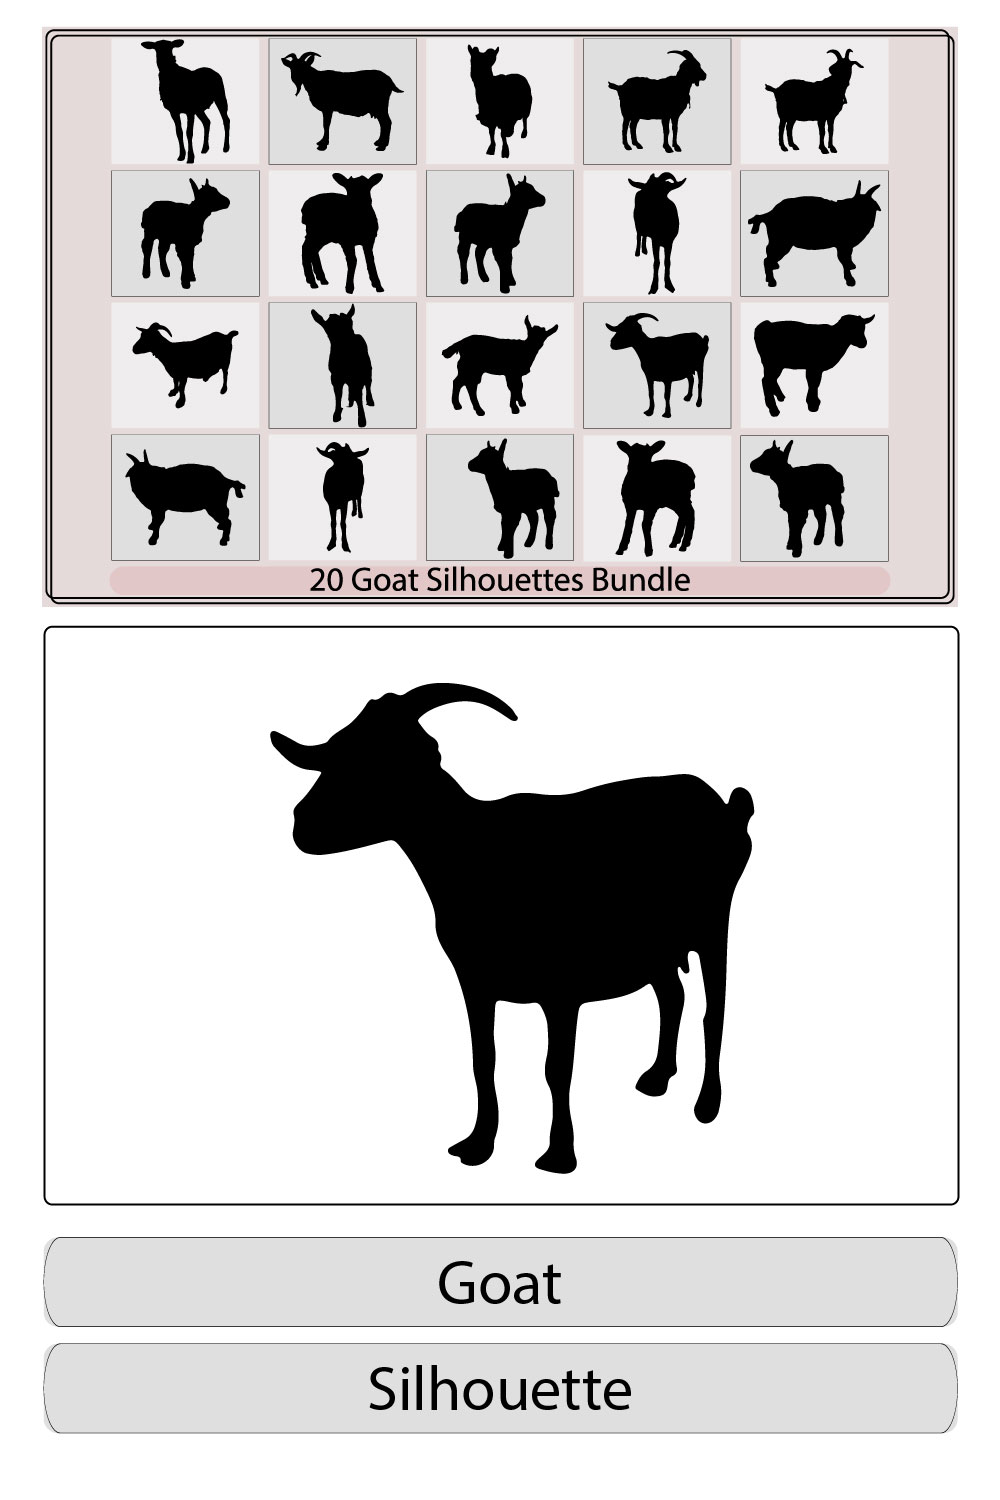 Goat Silhouette,goat animal farm icon,Goats isolated on white, hand drawn vector illustration,Goat vector silhouette Farm animal silhouette pinterest preview image.